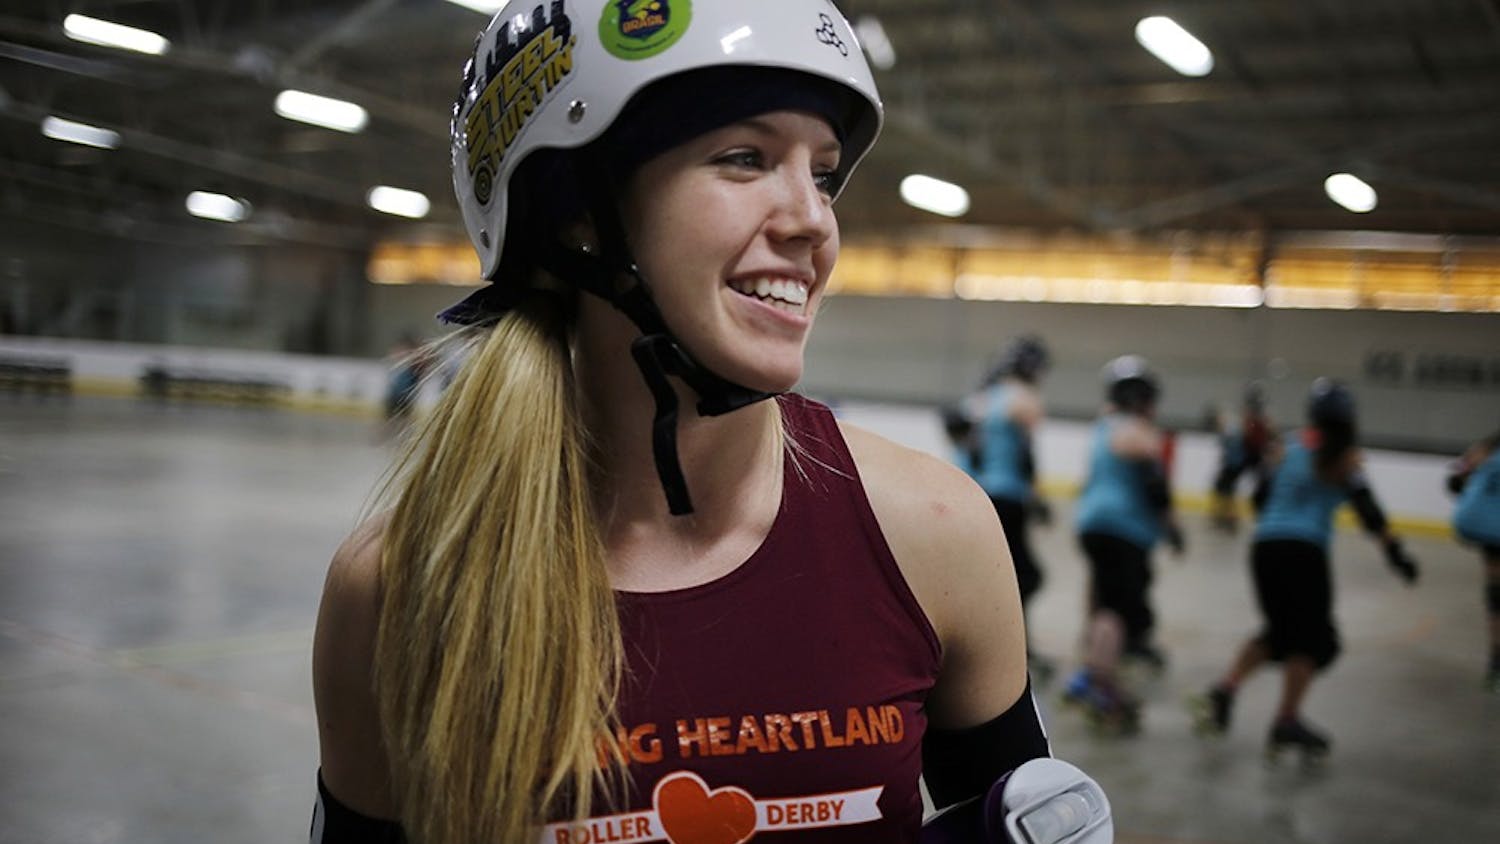 Becca Twait, a sophomore at IU, has been playing as a jammer on the Bleeding Heartland Roller Derby team in Bloomington since she joined the team in October. As the jammer, Becca scores points for her team by skating around the track and lapping members of the opposing team. "I like hitting people and going fast," said Twait. "Going fast is what I'm best at."